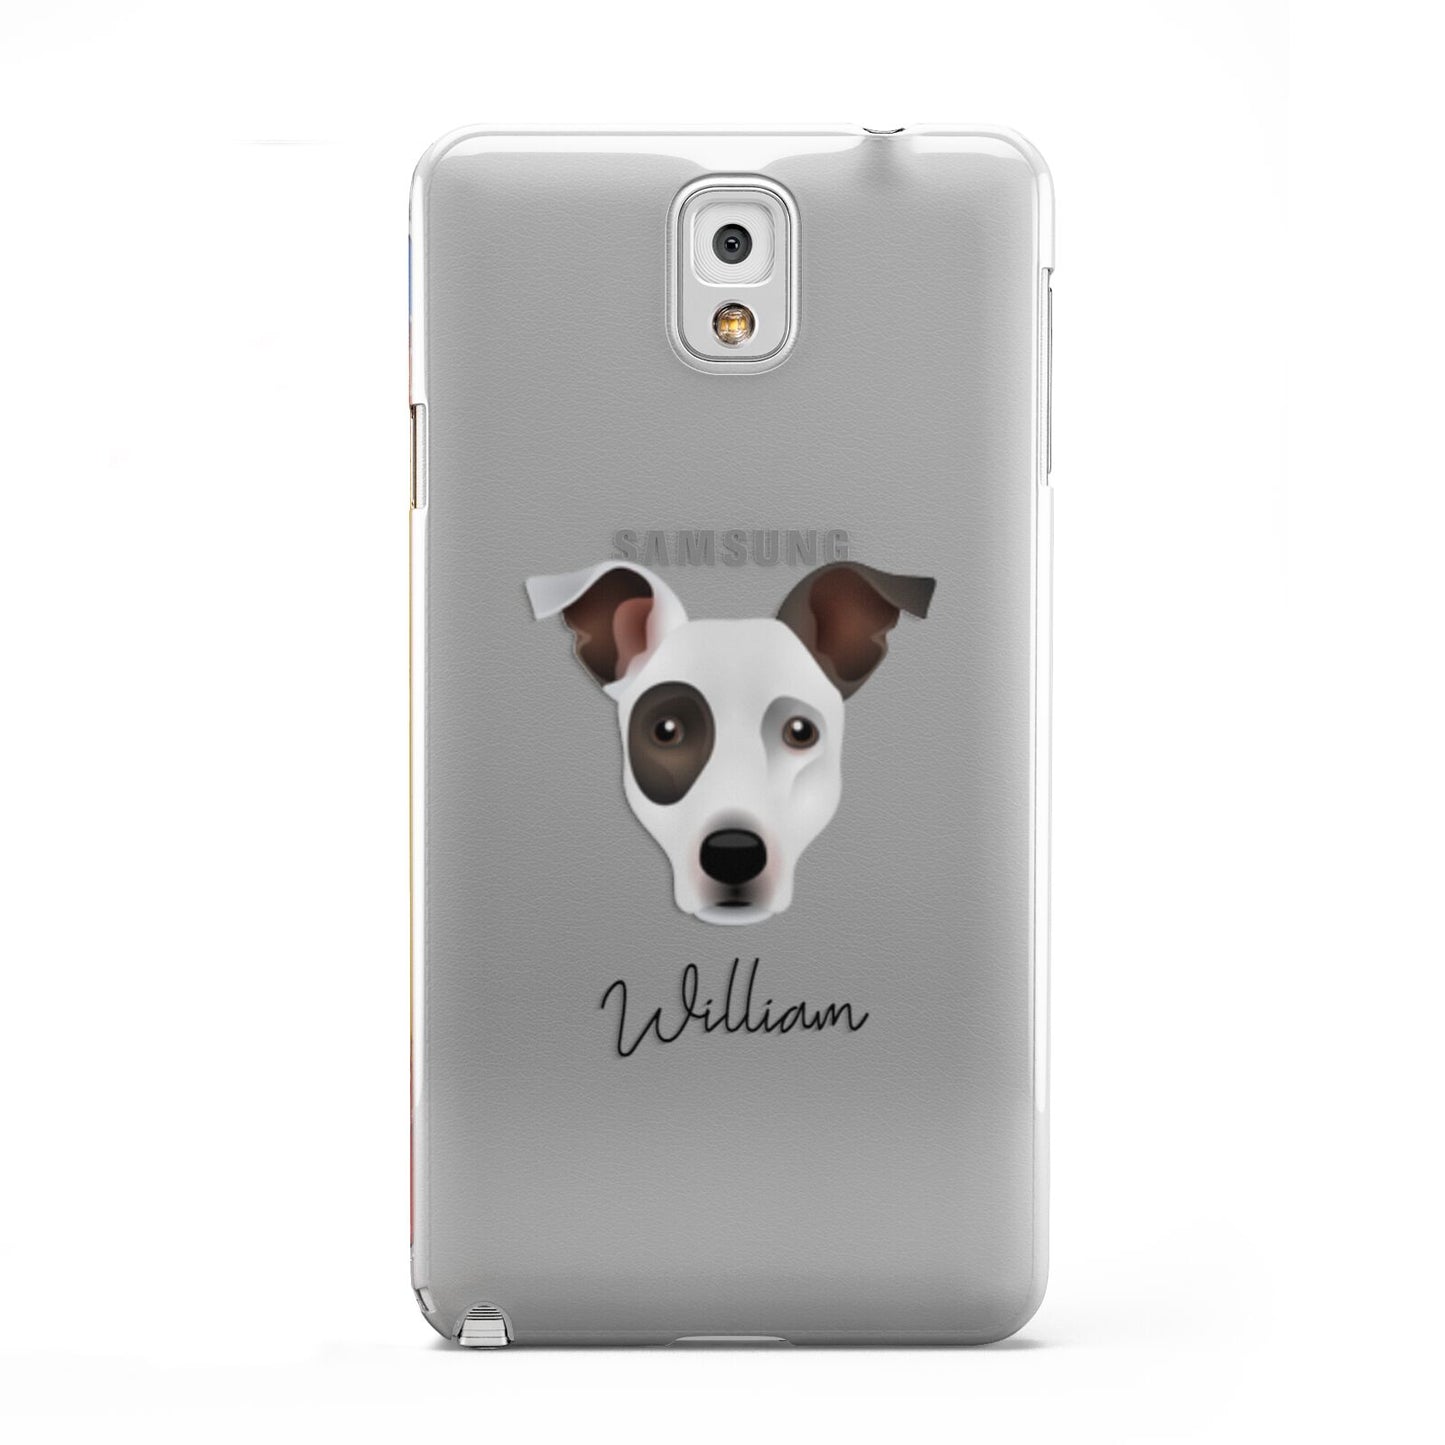 Staffy Jack Personalised Samsung Galaxy Note 3 Case